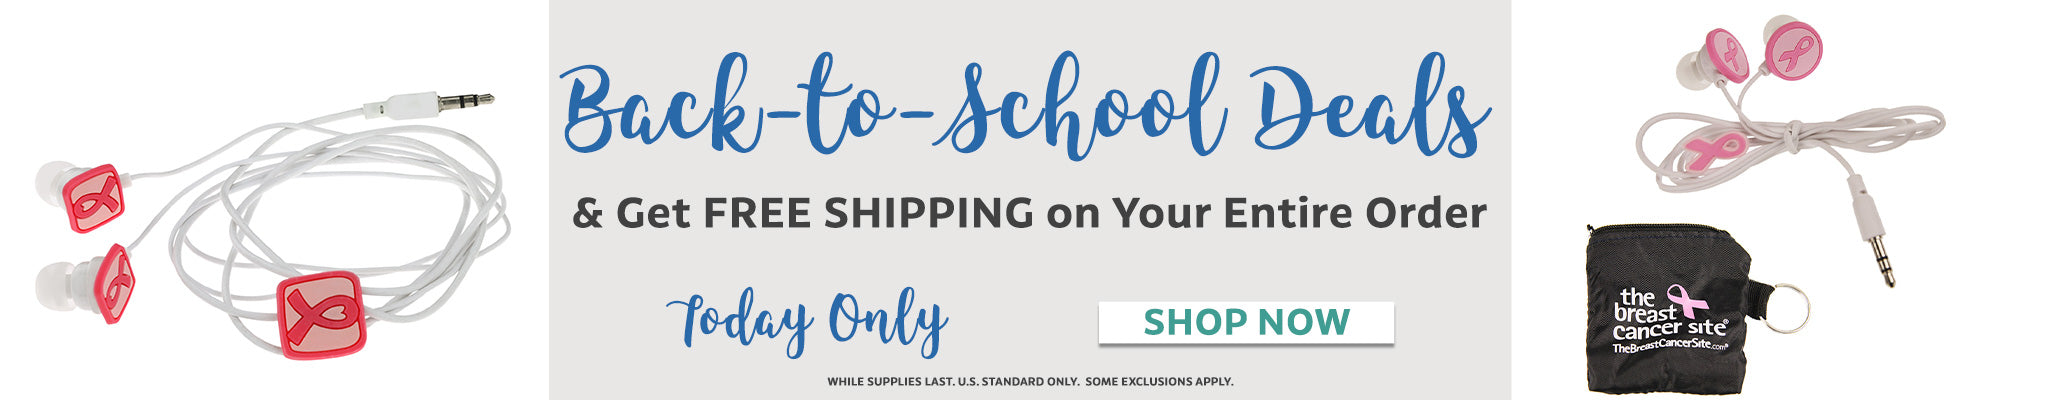 Back to School Retail Lightbox | Free Shipping on Your Entire Order with Purchase